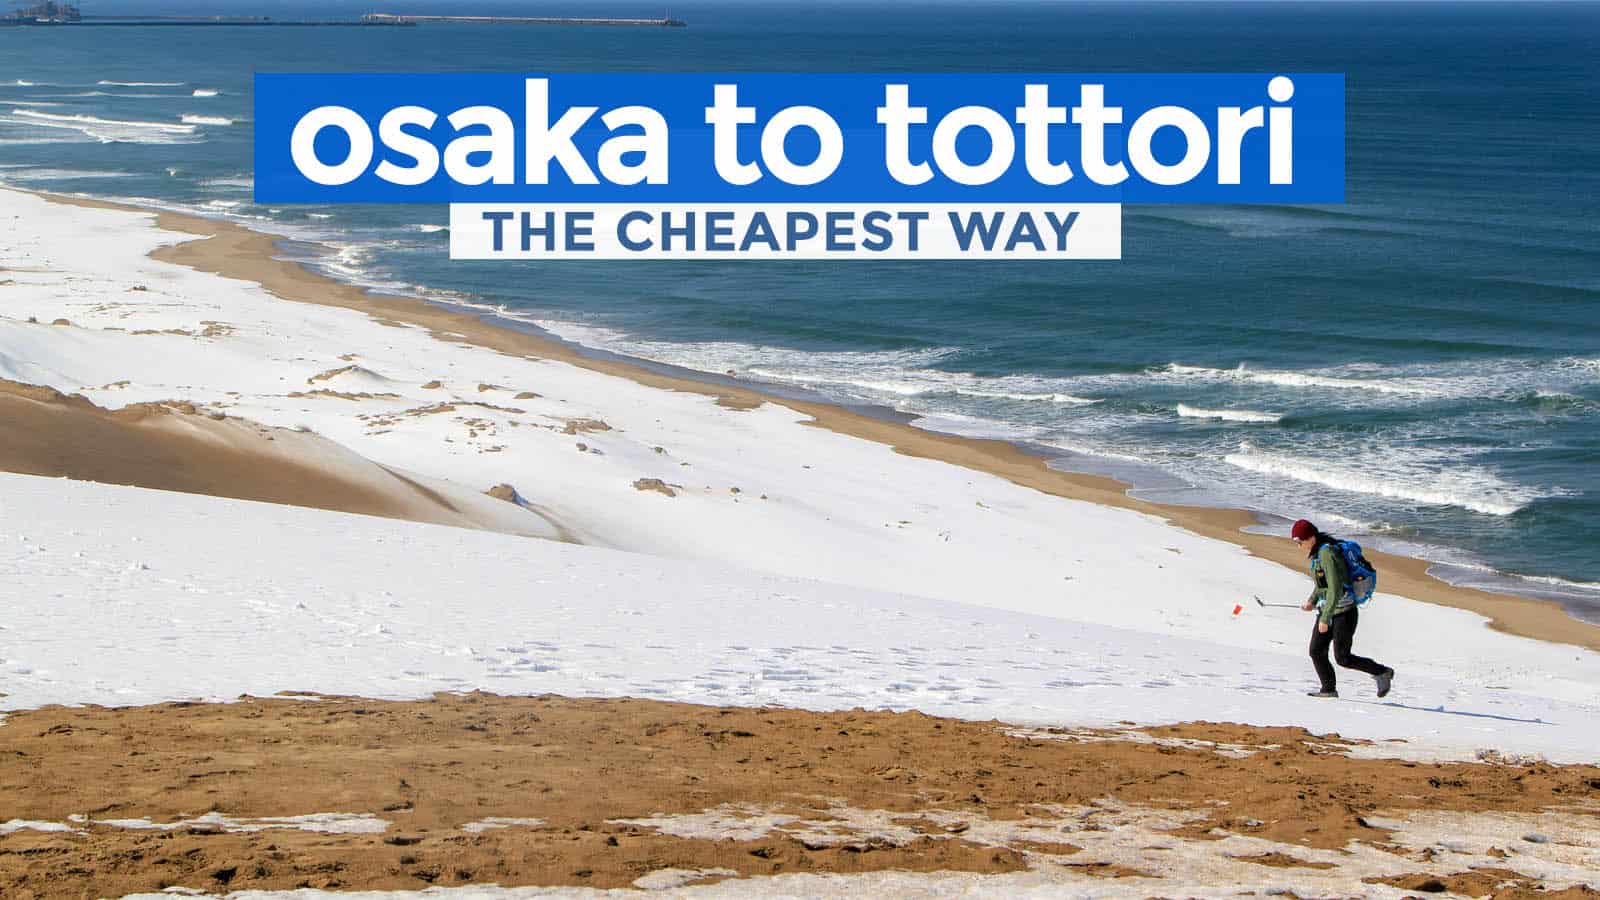 How to Get to TOTTORI from OSAKA or KANSAI AIRPORT: The Cheapest Way